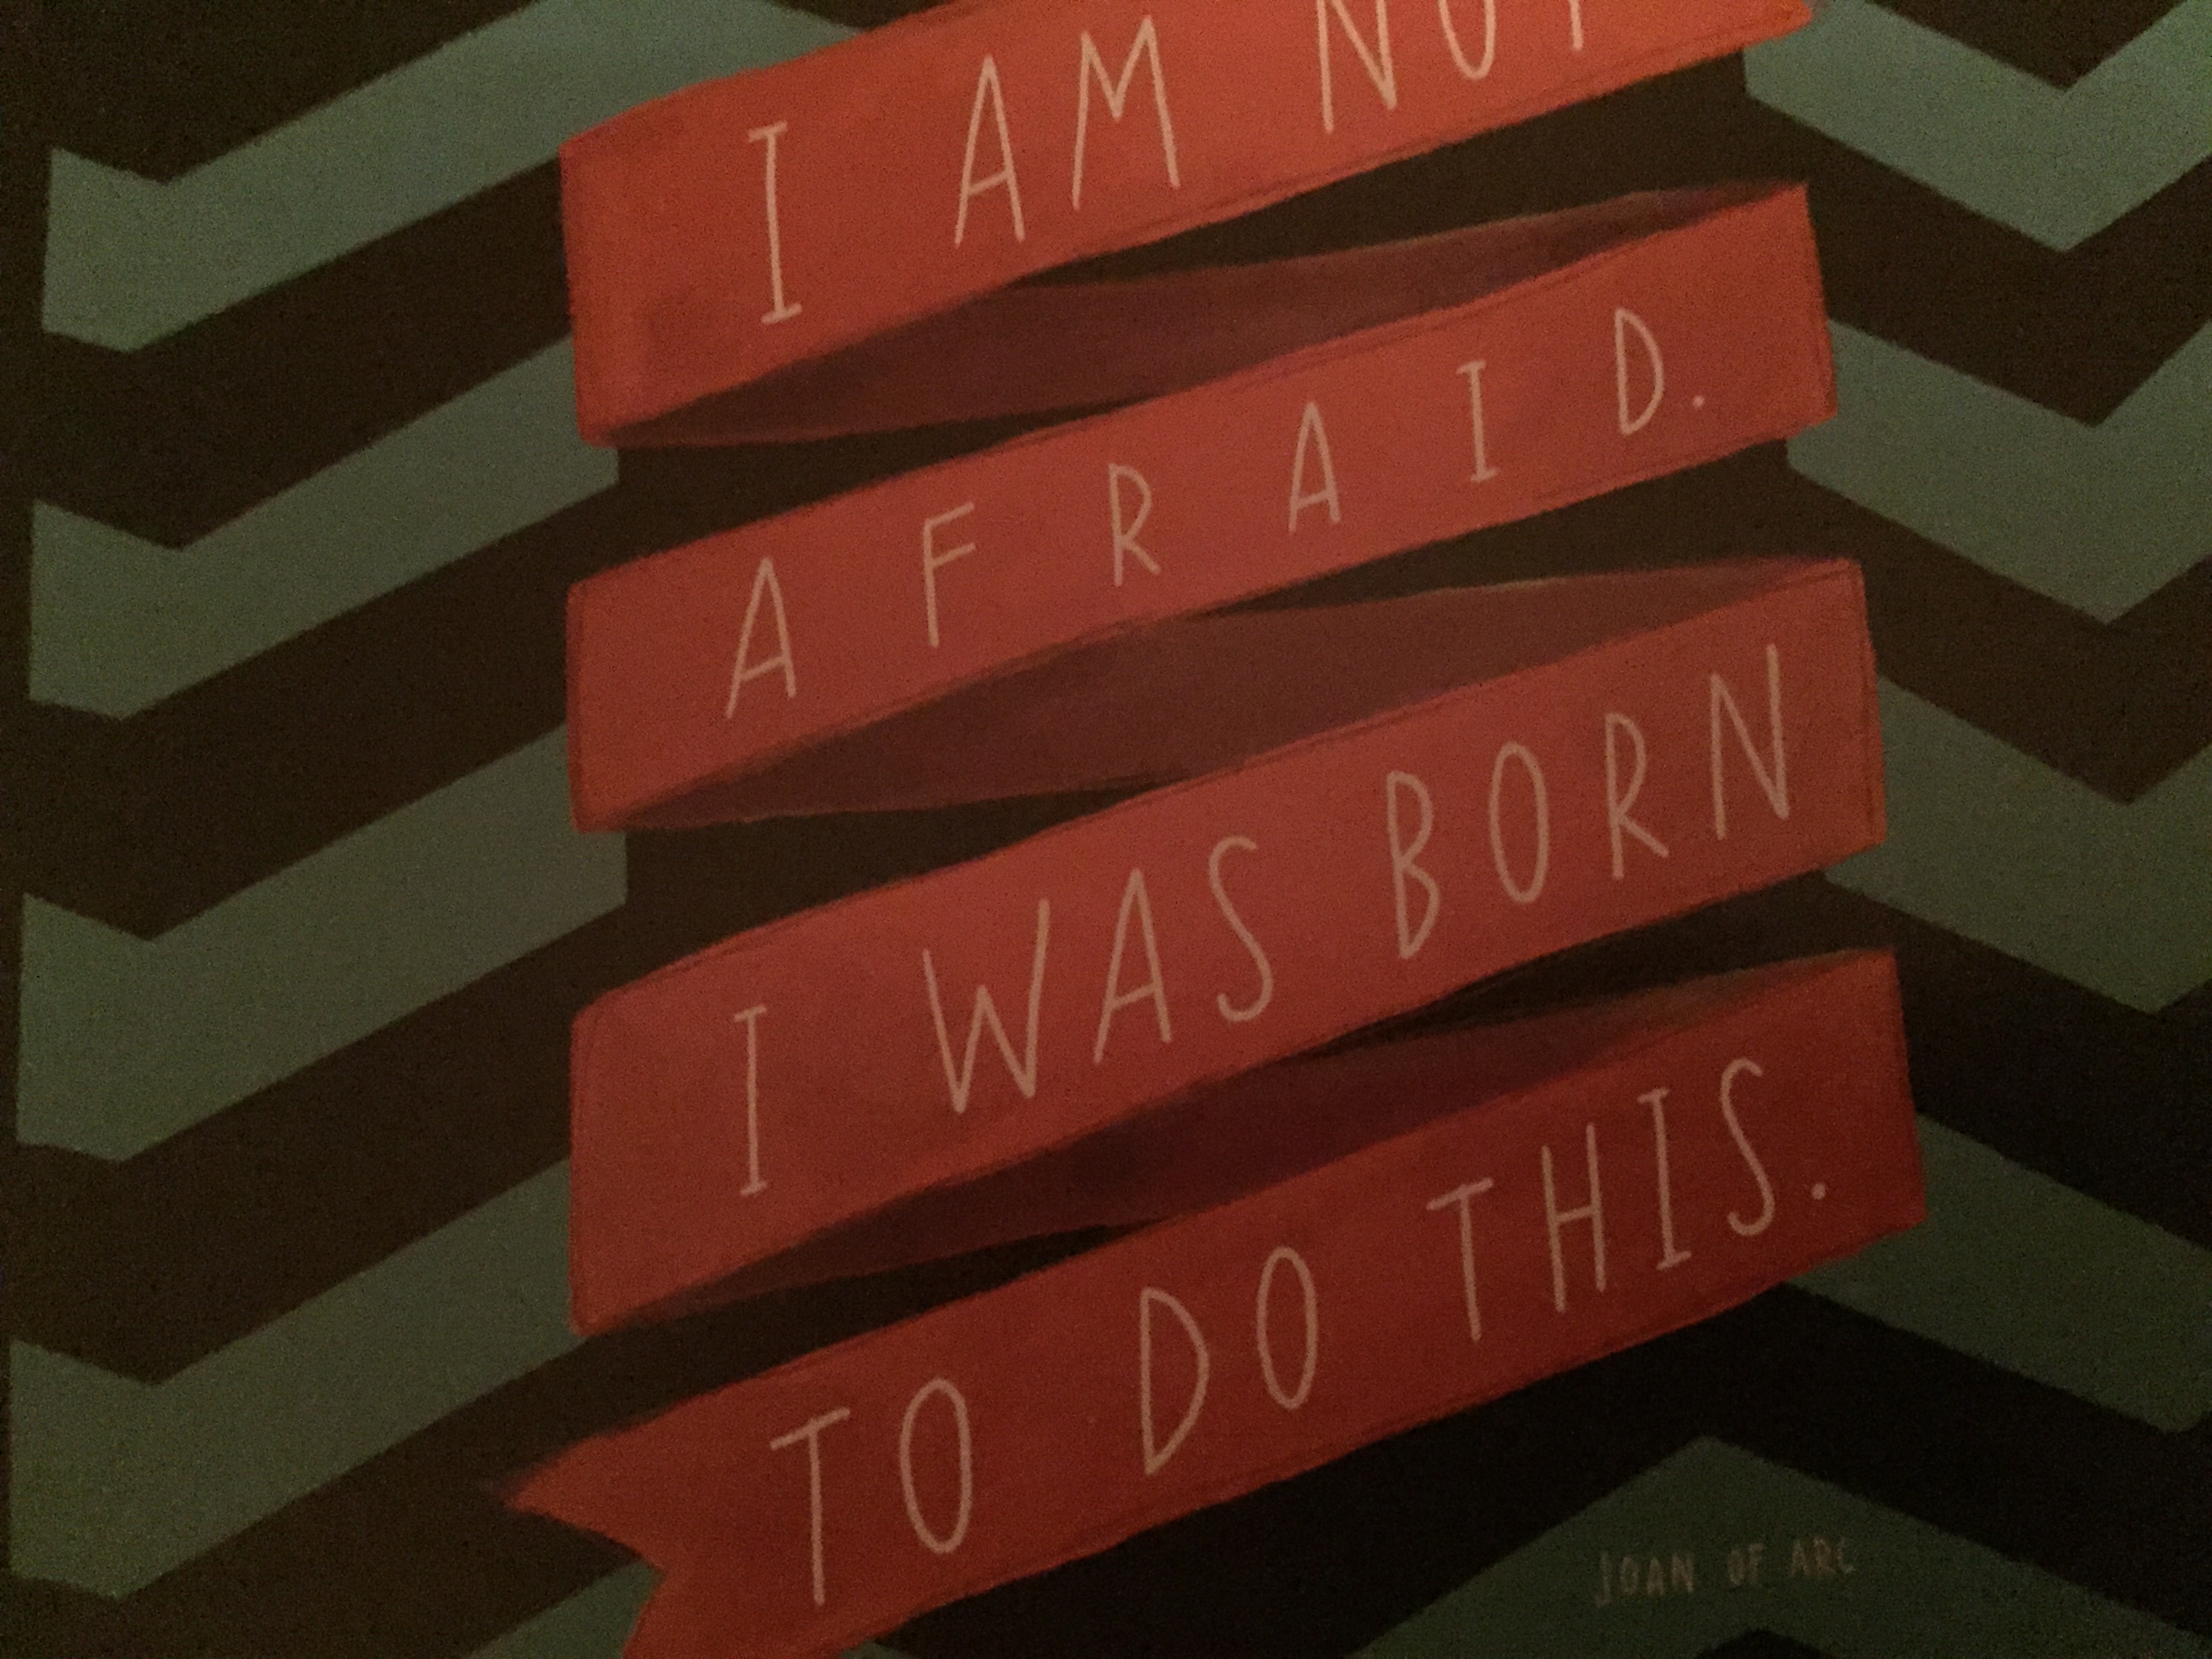 I am not afraid, I was born to do this.